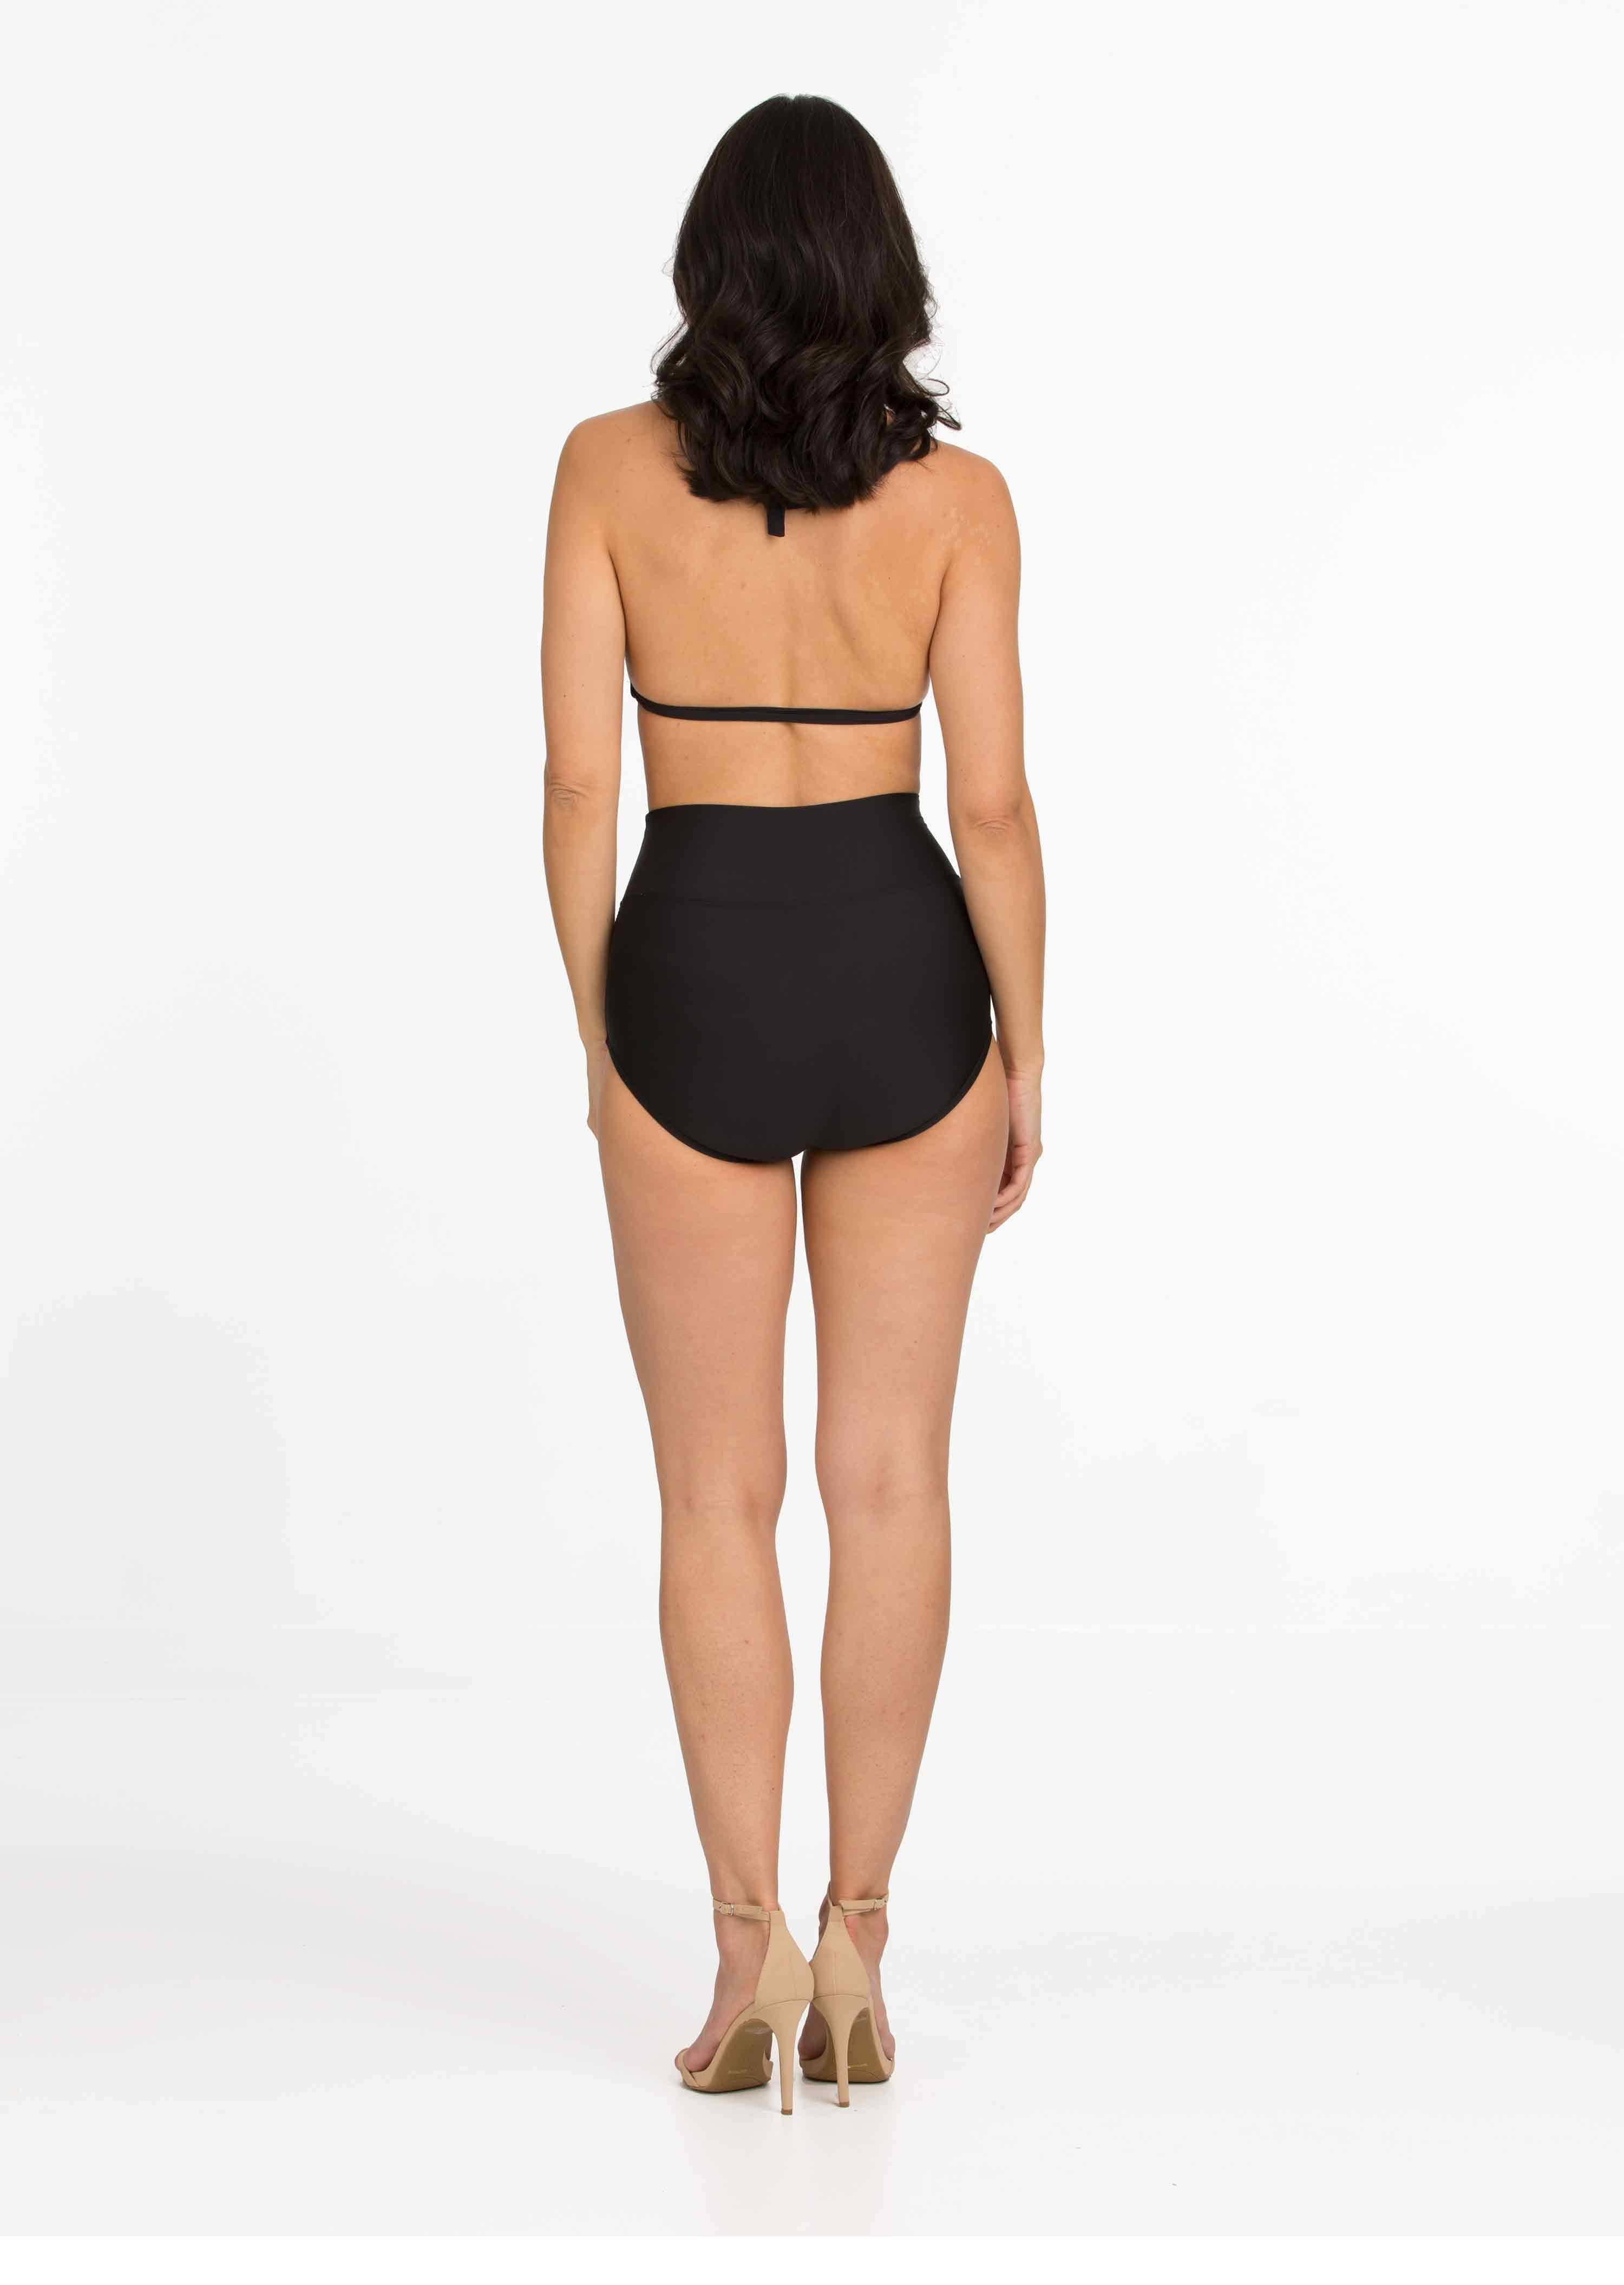 Black 7 Way Convertible Top with High Waist Bottom with Low Leg (FT-134/FT-233)